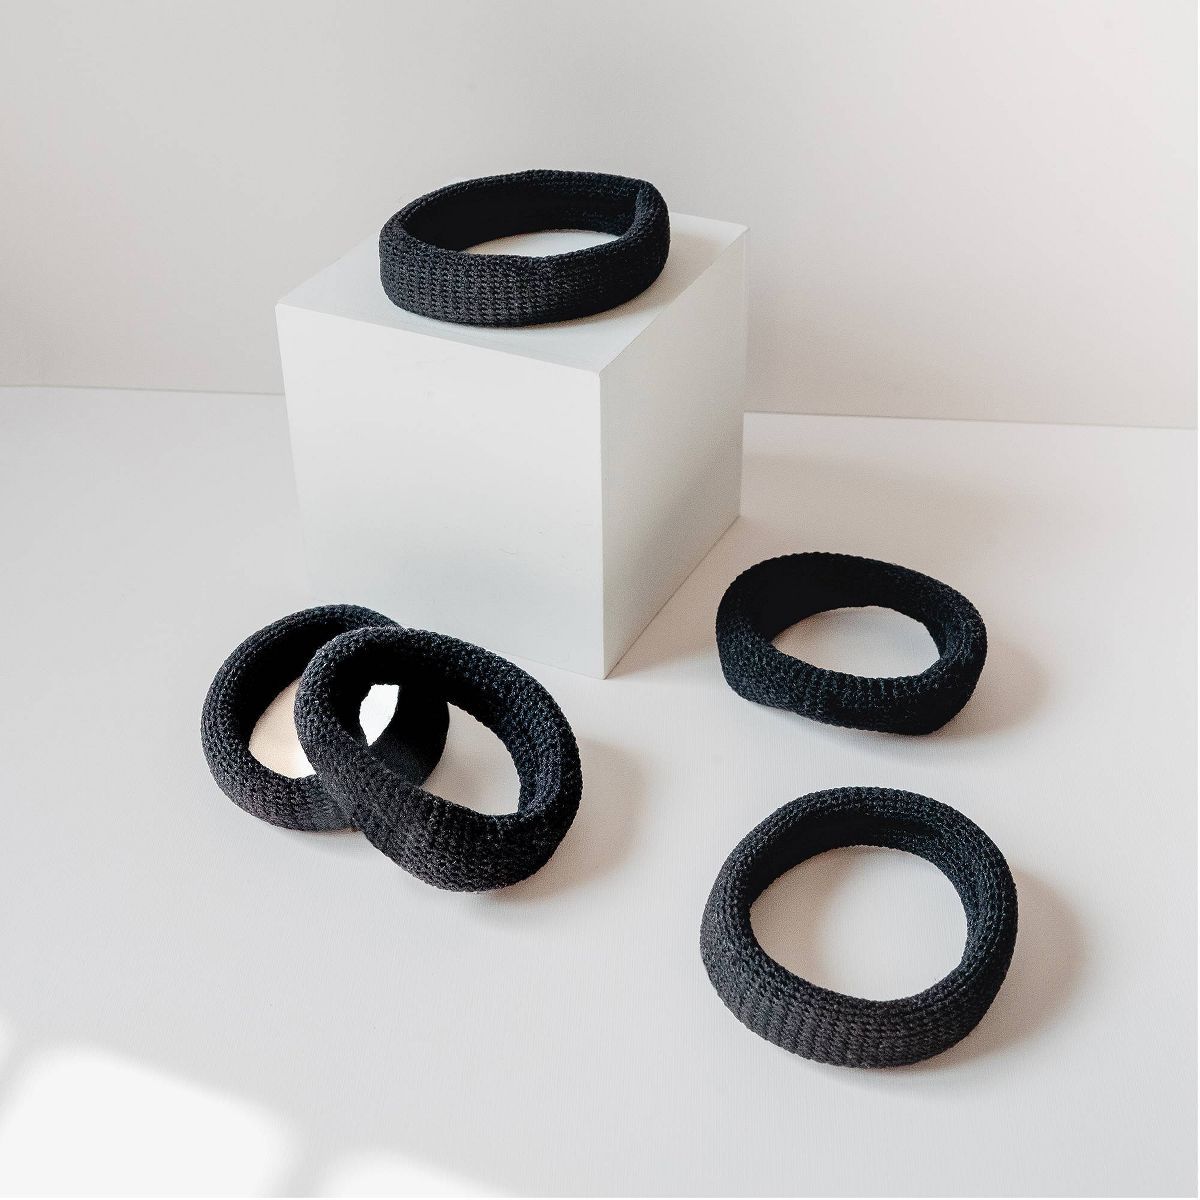 Gimme Beauty Thick Hair Tie Bands - Black - 6ct | Target